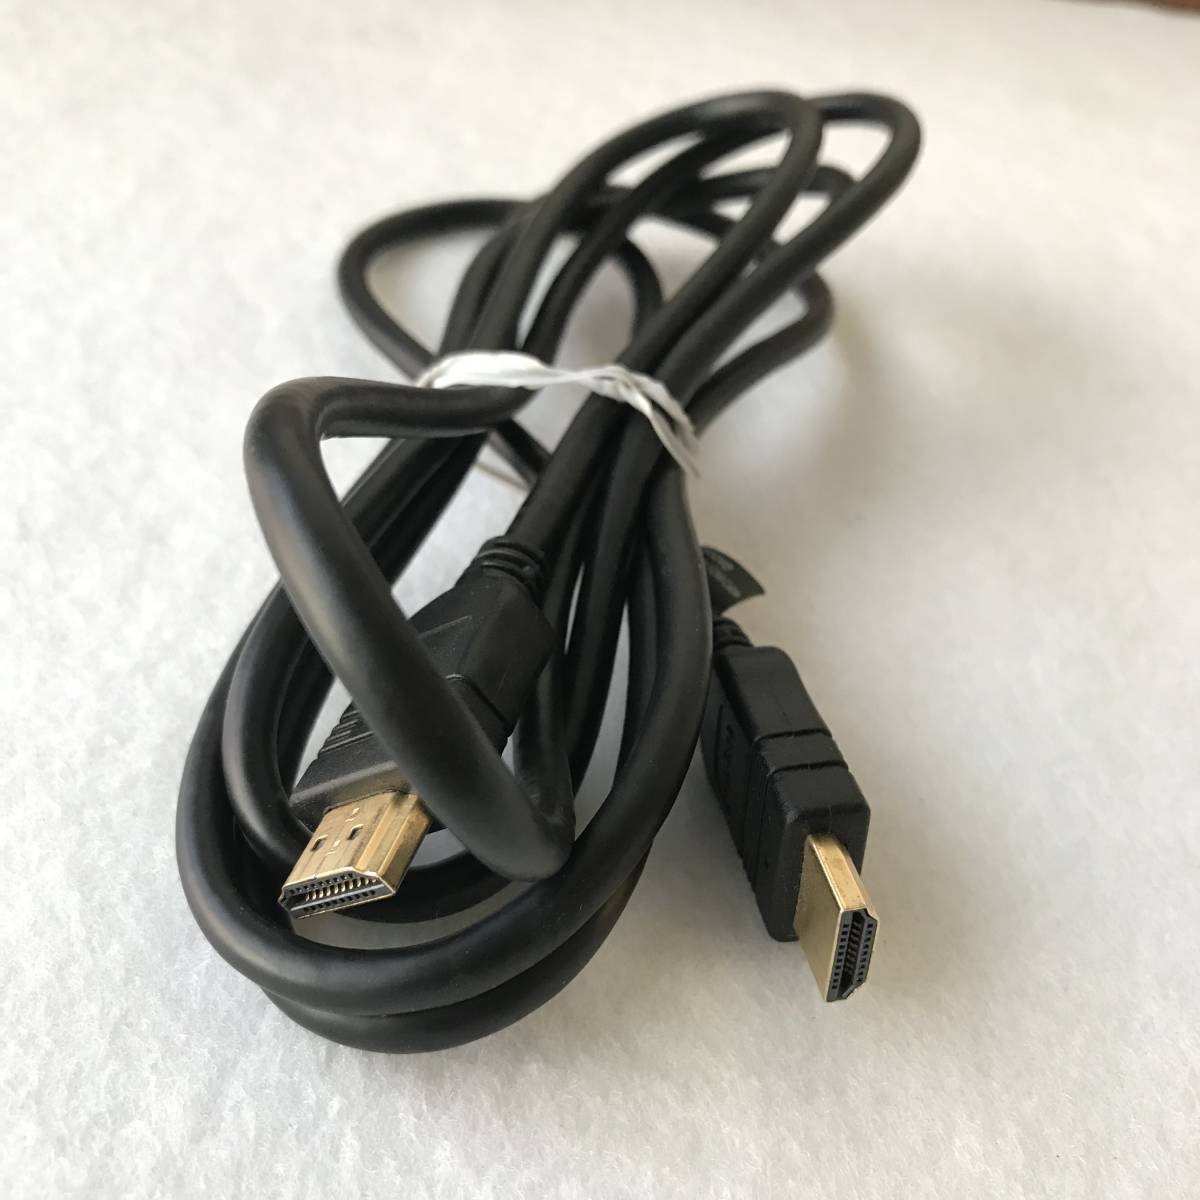 lenovo HDMI　ケーブル　約1.8m high speed HDMI cable with ethernet_画像1